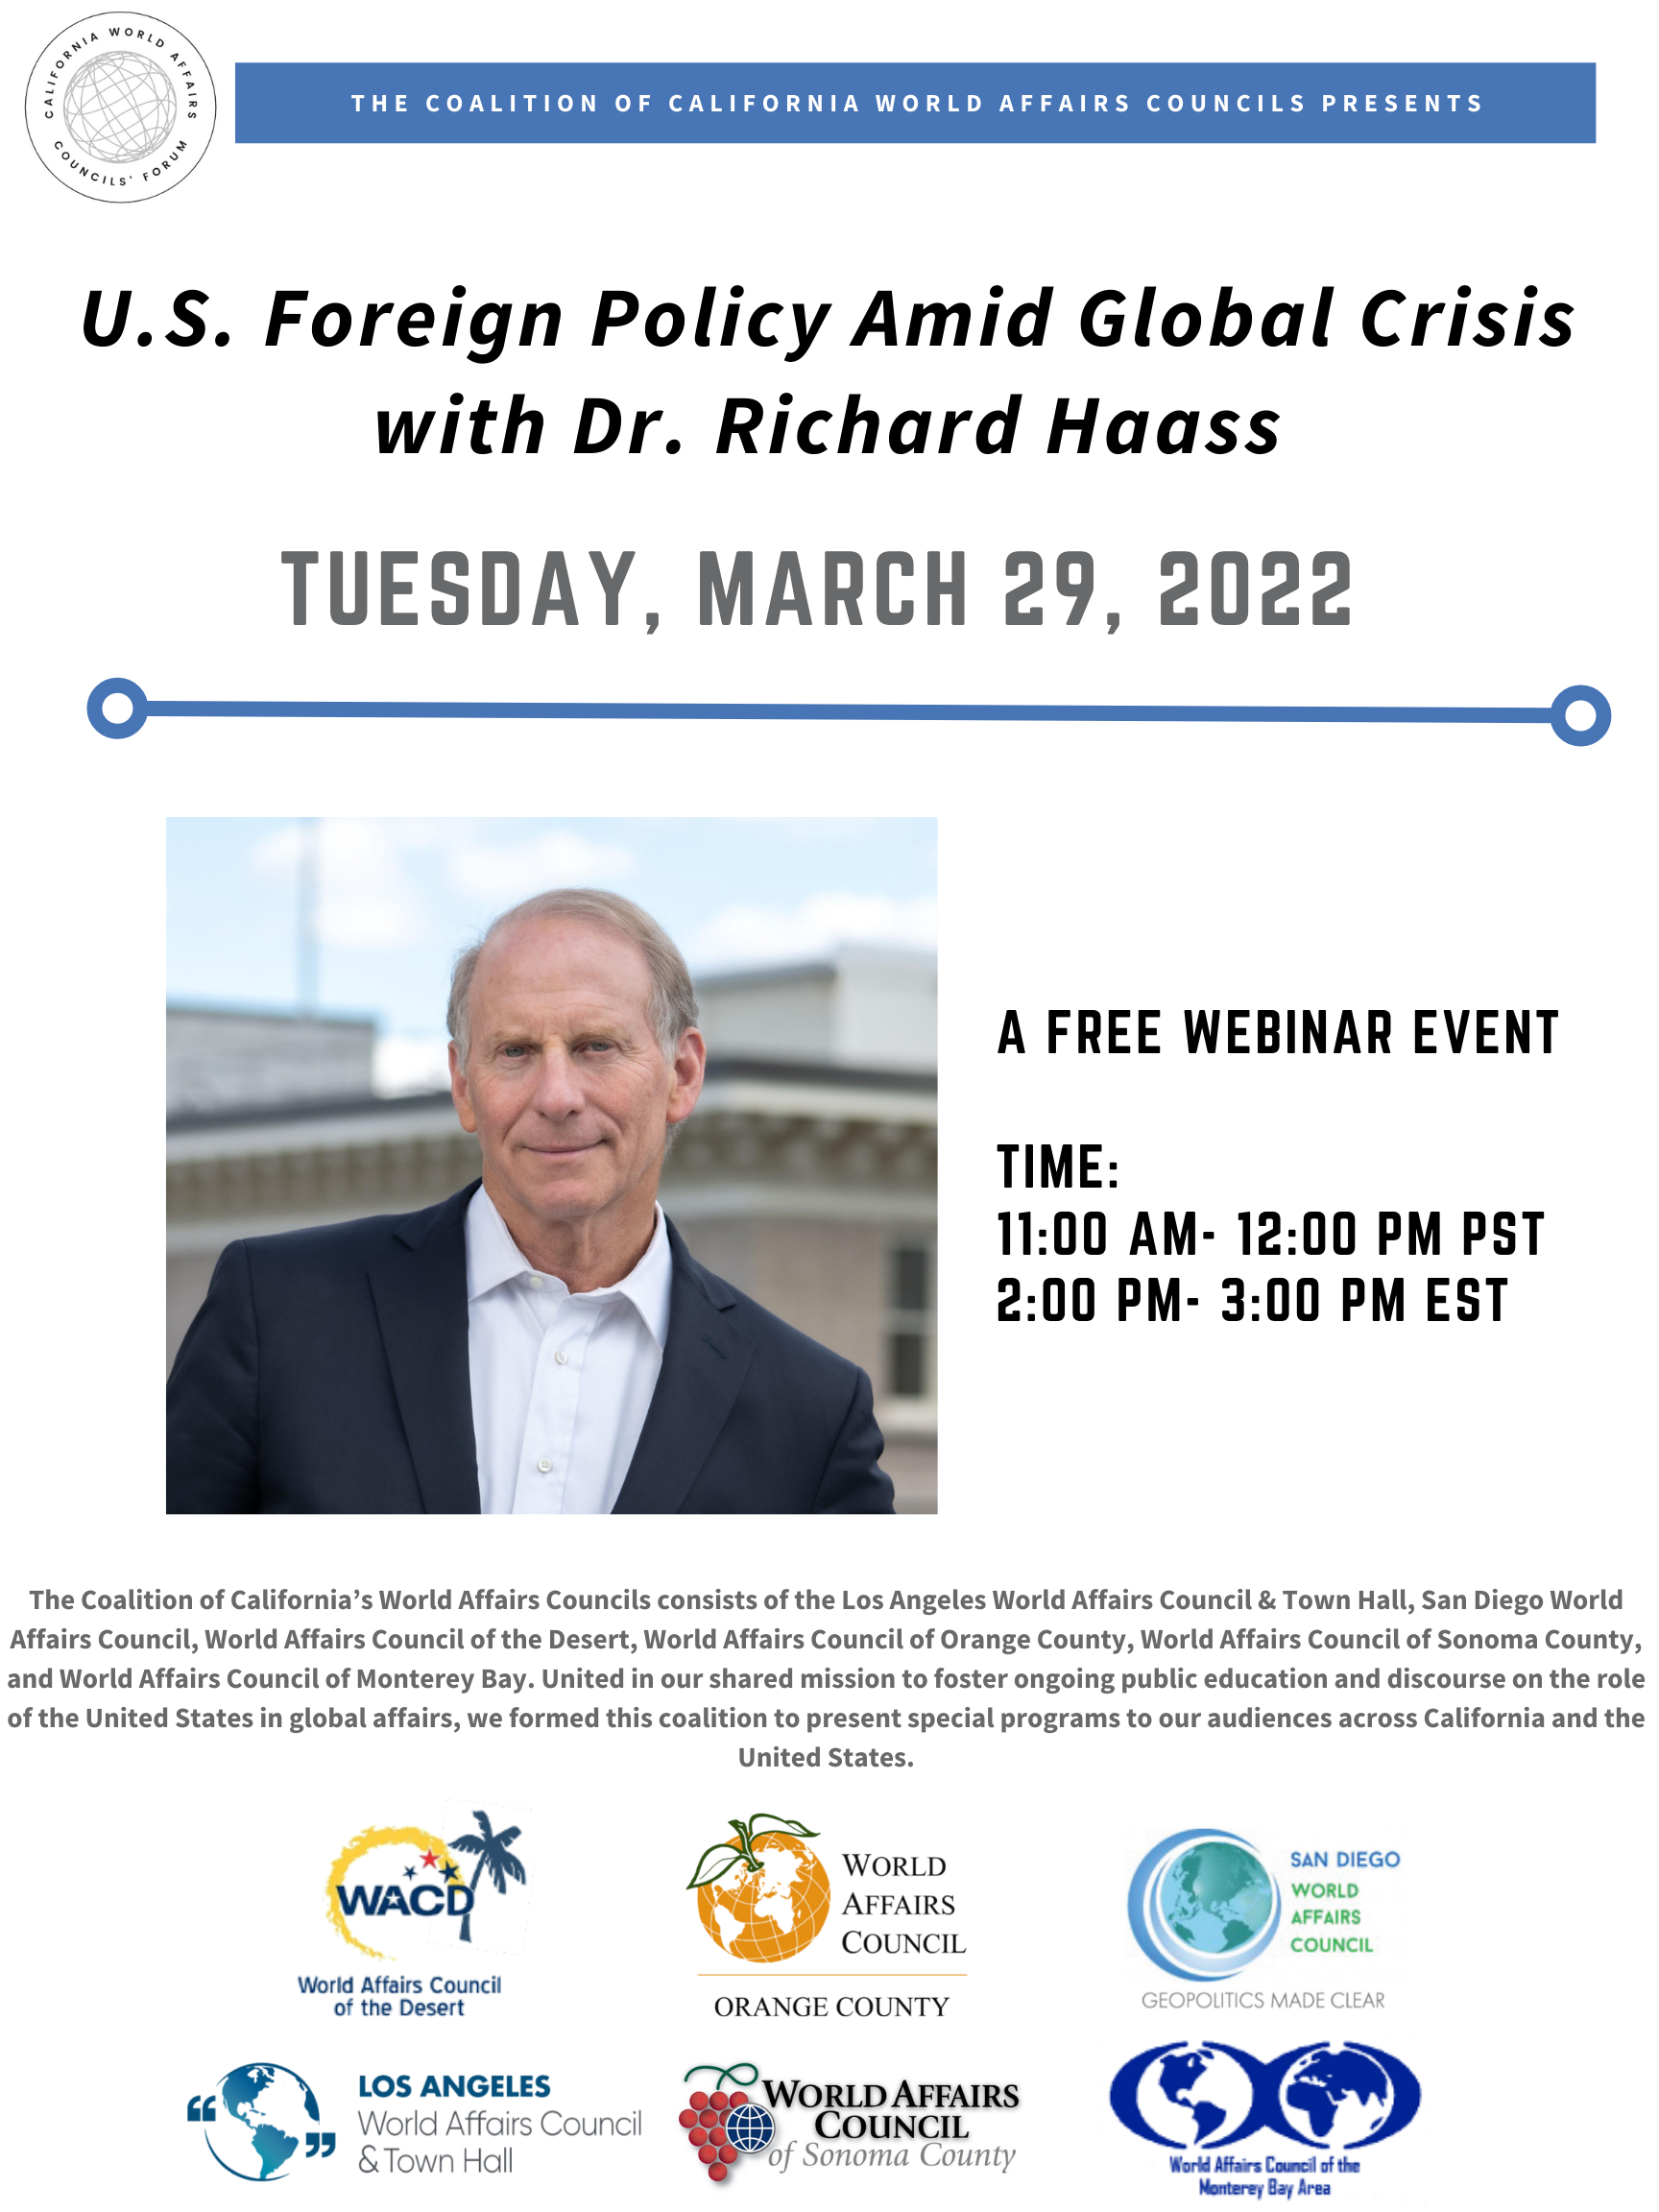 U.S. Foreign Policy Amid Global Crisis with Dr. Richard Haass